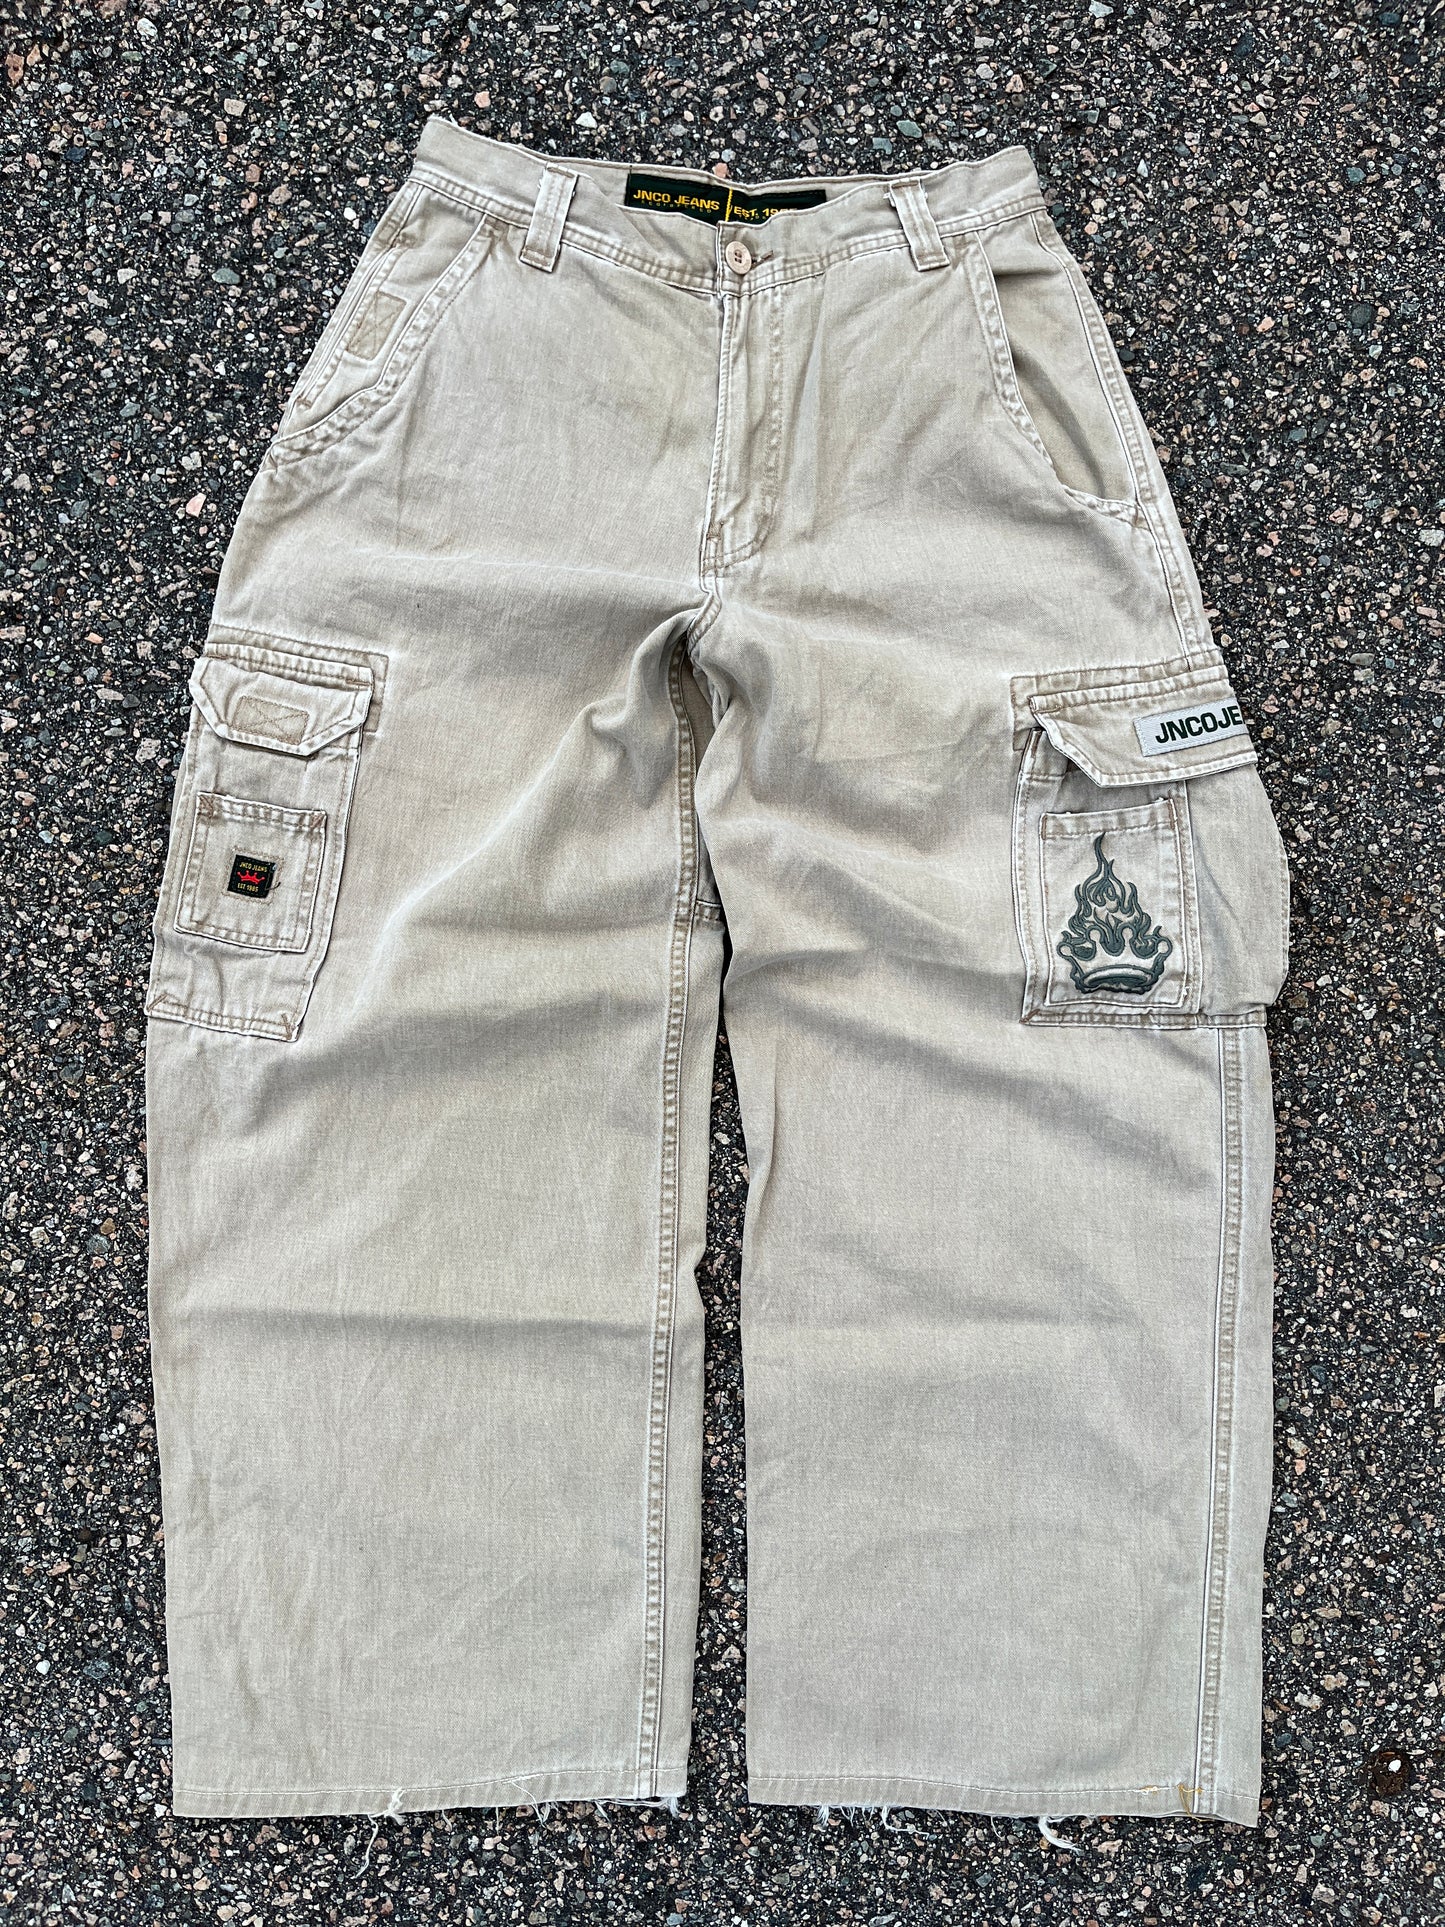 Faded JNCO Flame Cargo Wide Leg Pants - 30 x 28